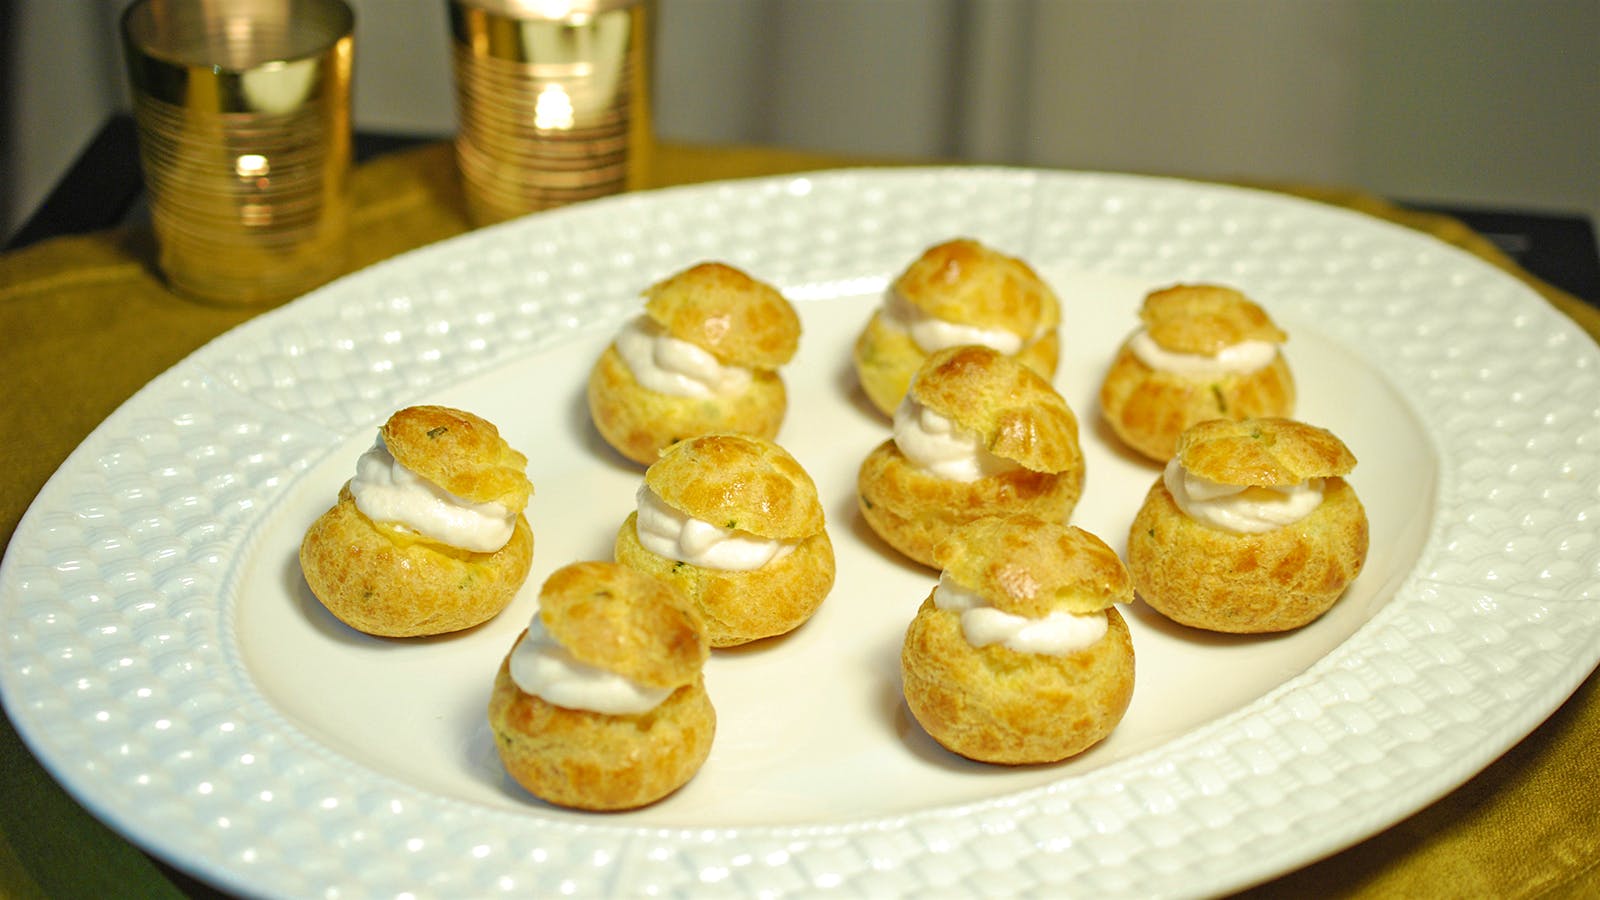 8 & $20: Salmon and Goat Cheese Puffs